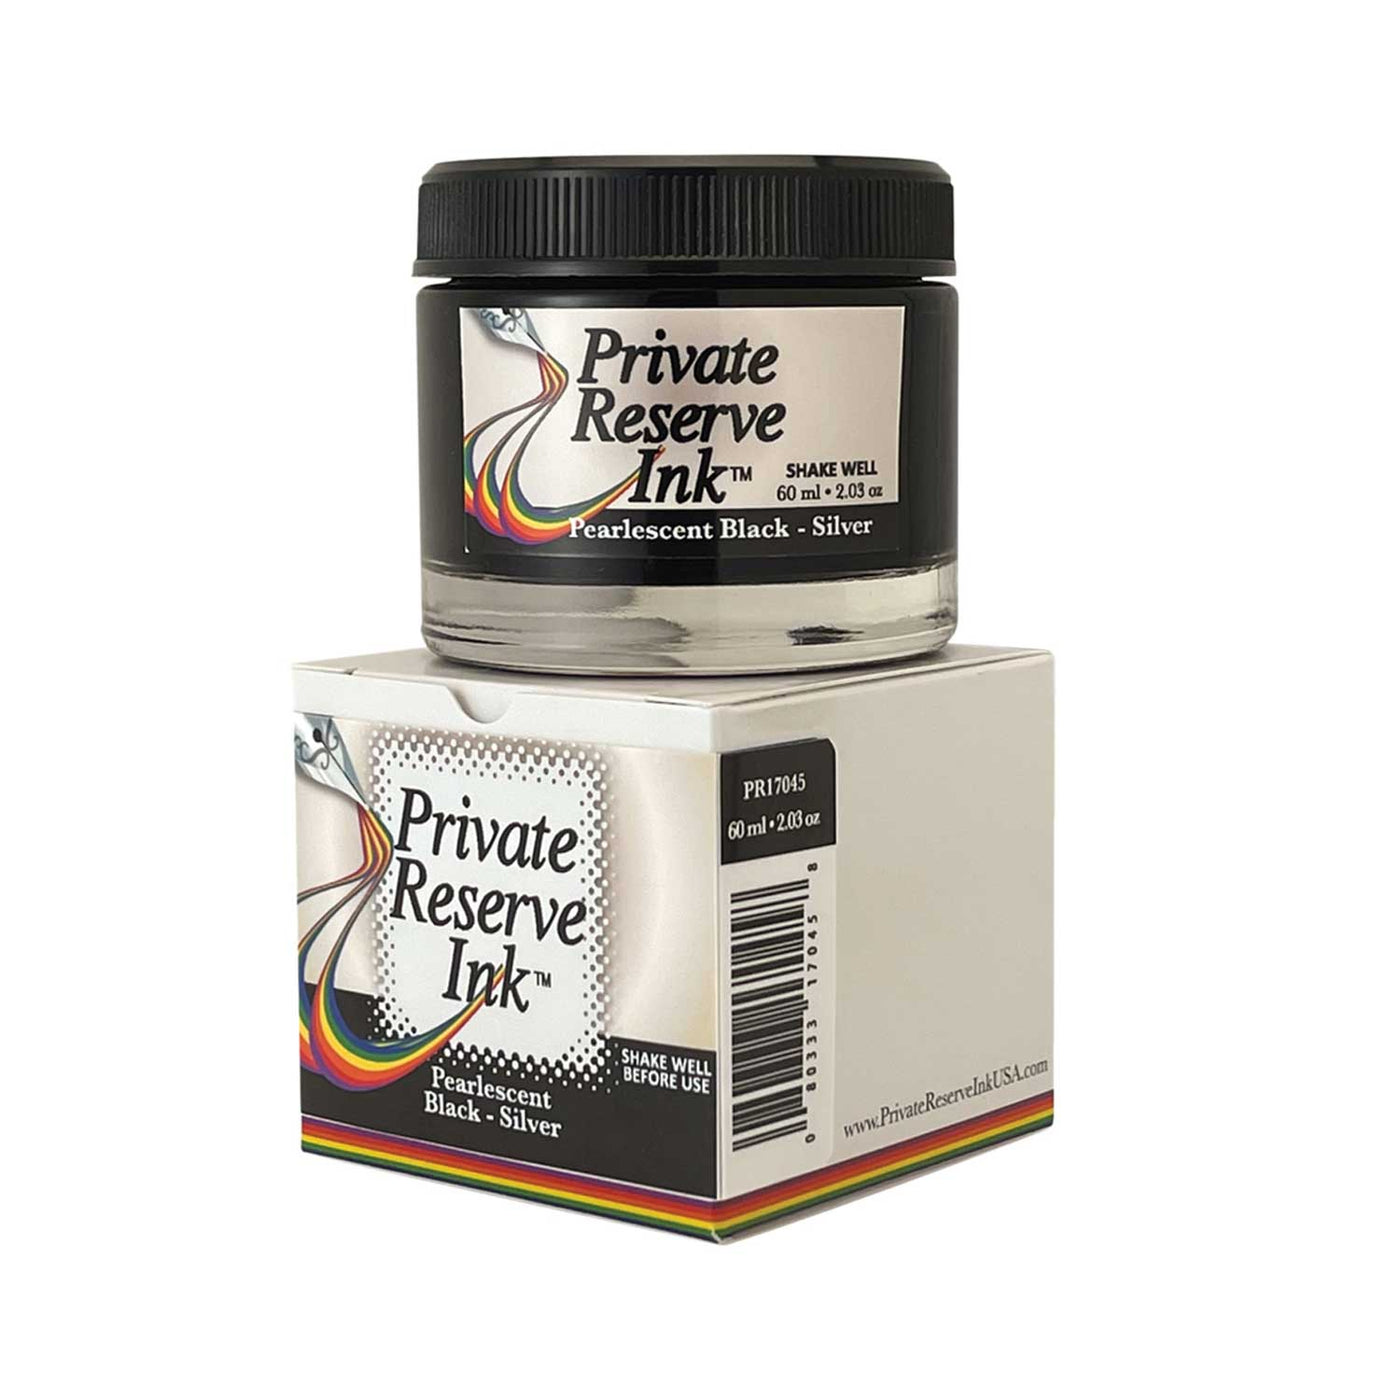 Private Reserve Pearlescent Black Silver Ink Bottle - 60ml 2